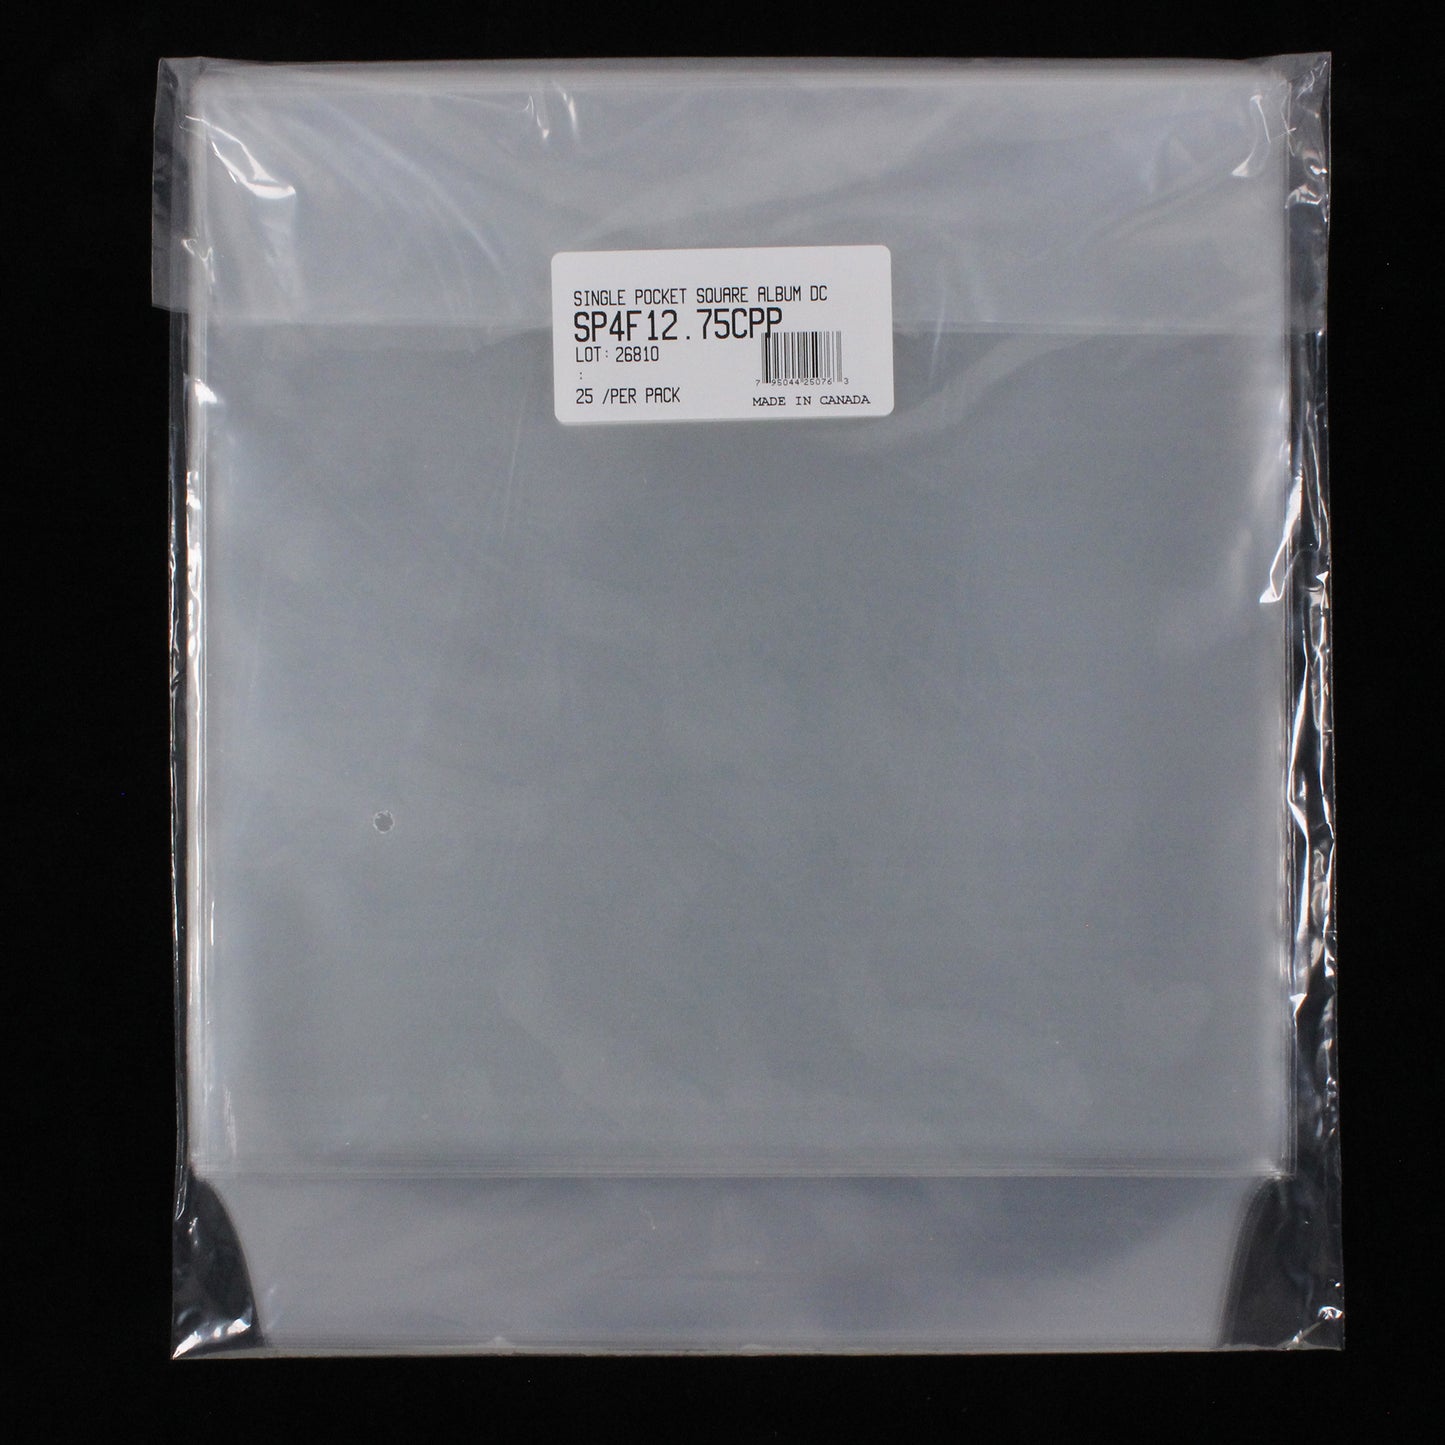 12.75" Single Pocket Outer Sleeves w/ Flap - 4mil (25 pack) - Vinyl Storage Solutions